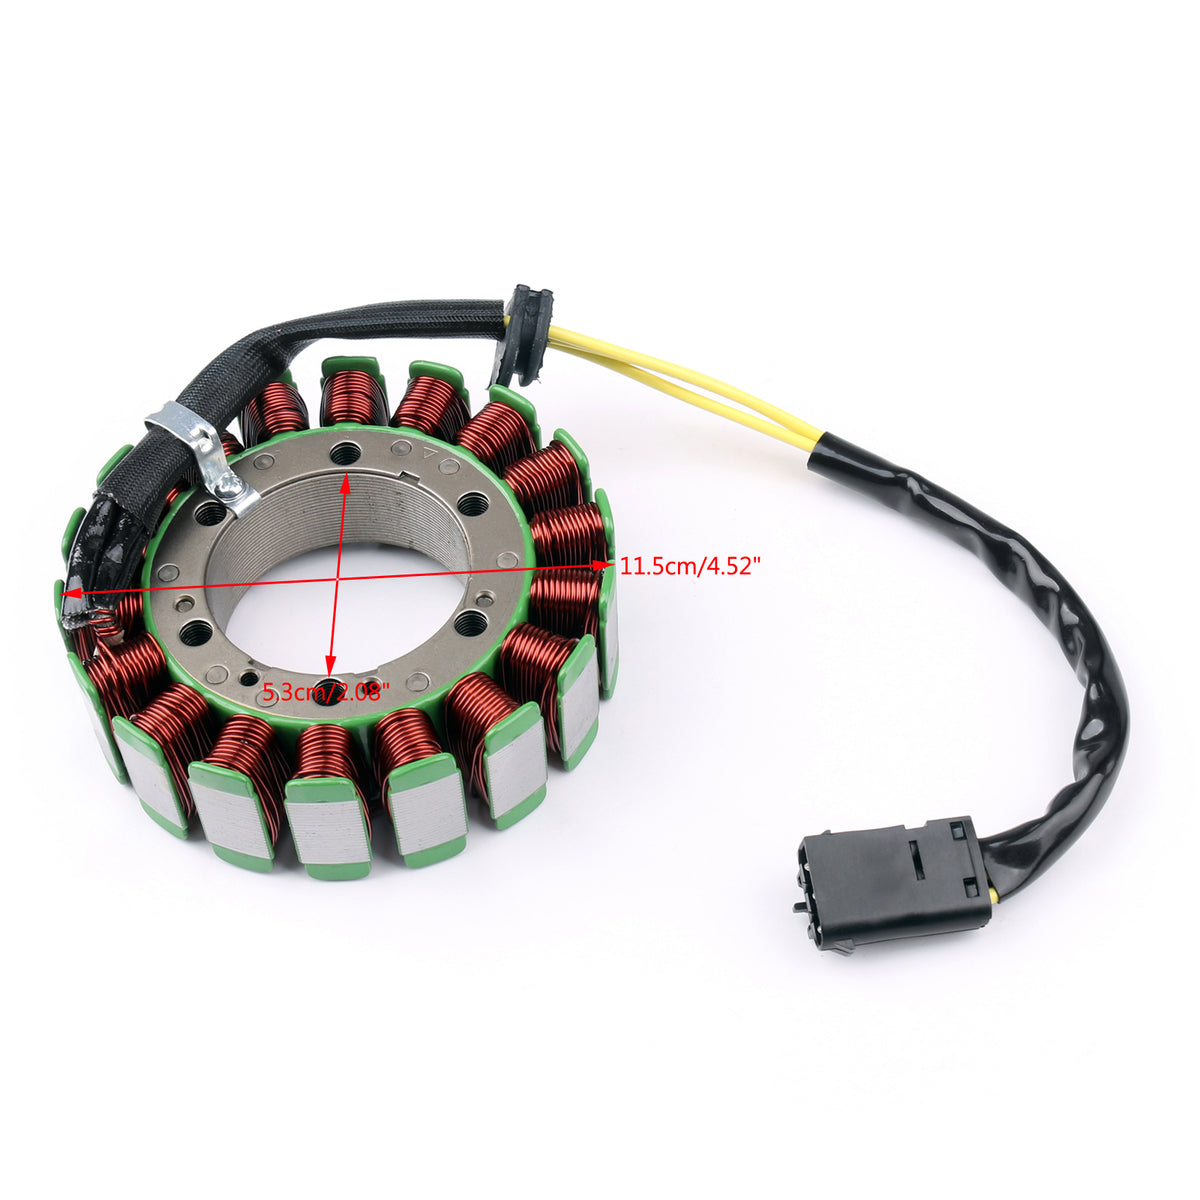 Magneto Generator Stator Coil For BMW G650GS 11-15 F650GS 99-07 F650CS 00-05